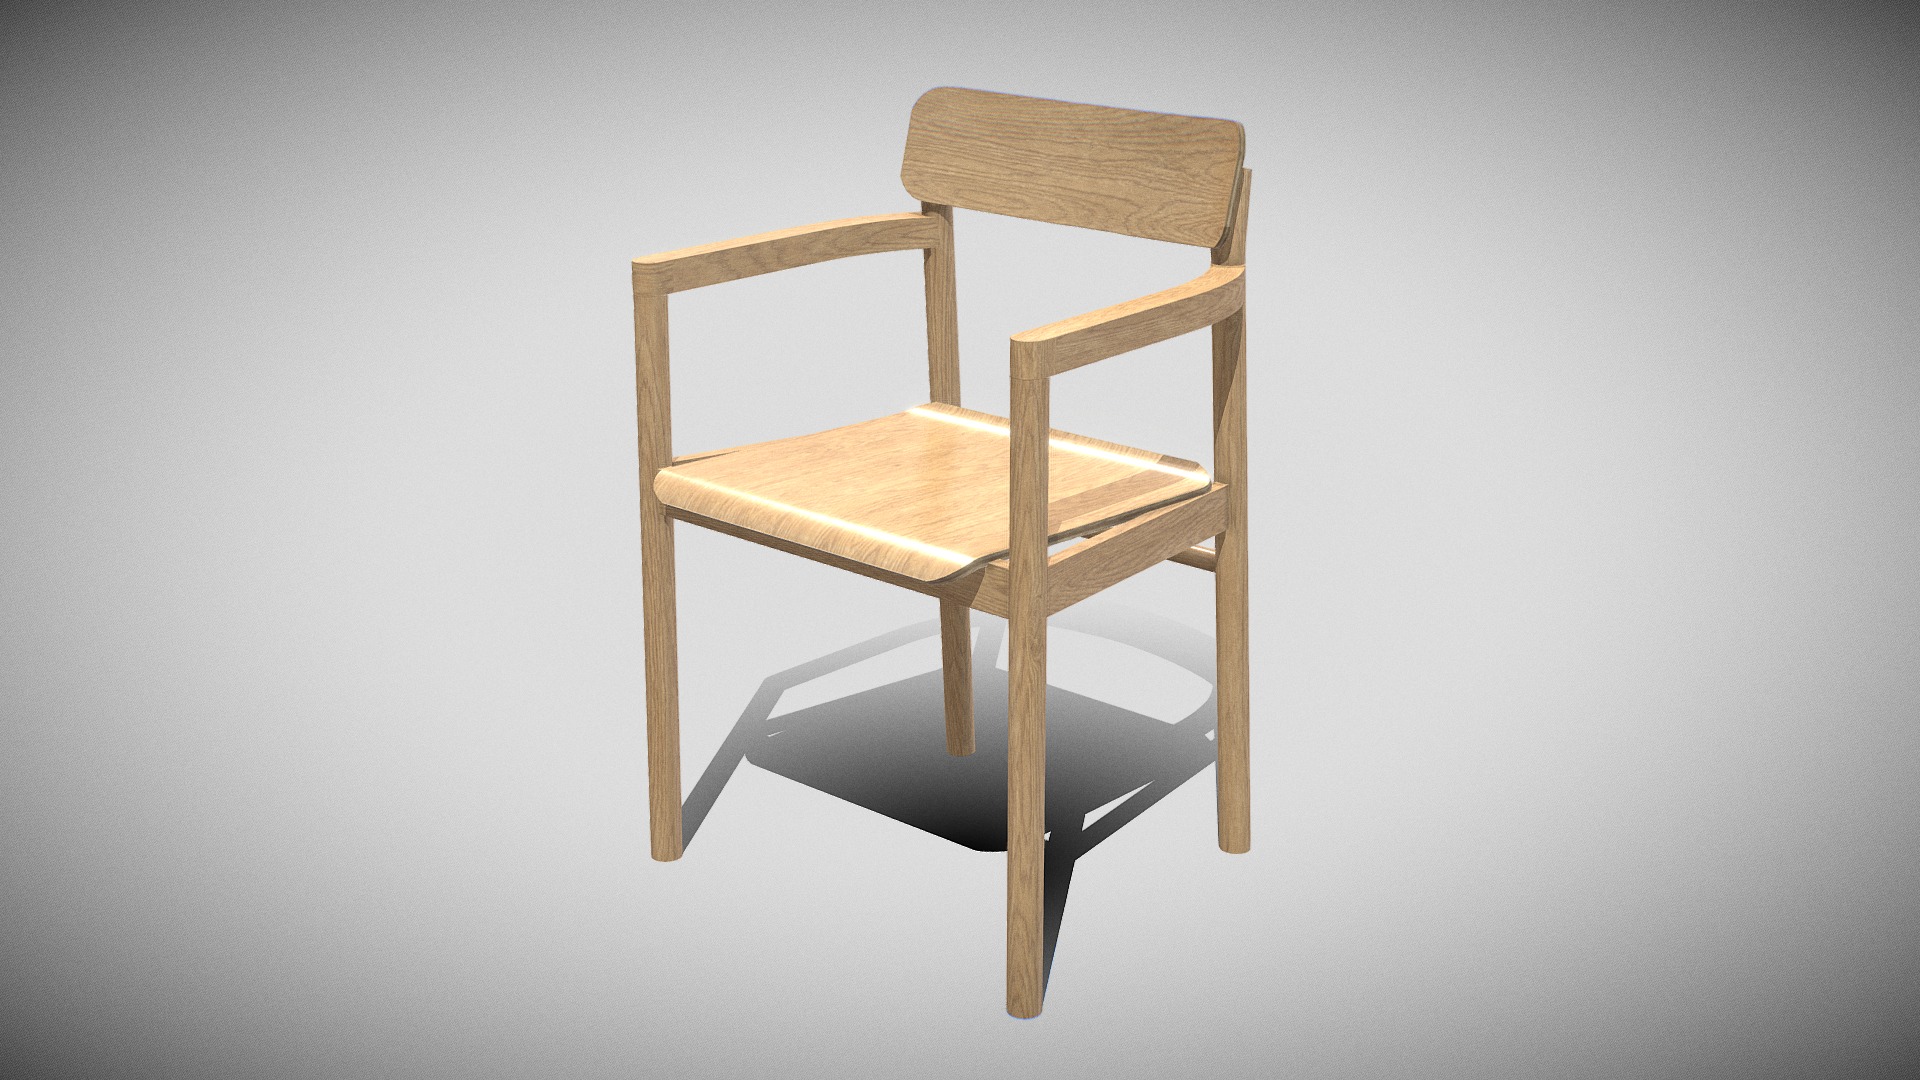 3D model Post Chair-oak standard lacquered - This is a 3D model of the Post Chair-oak standard lacquered. The 3D model is about a wooden chair on a stand.